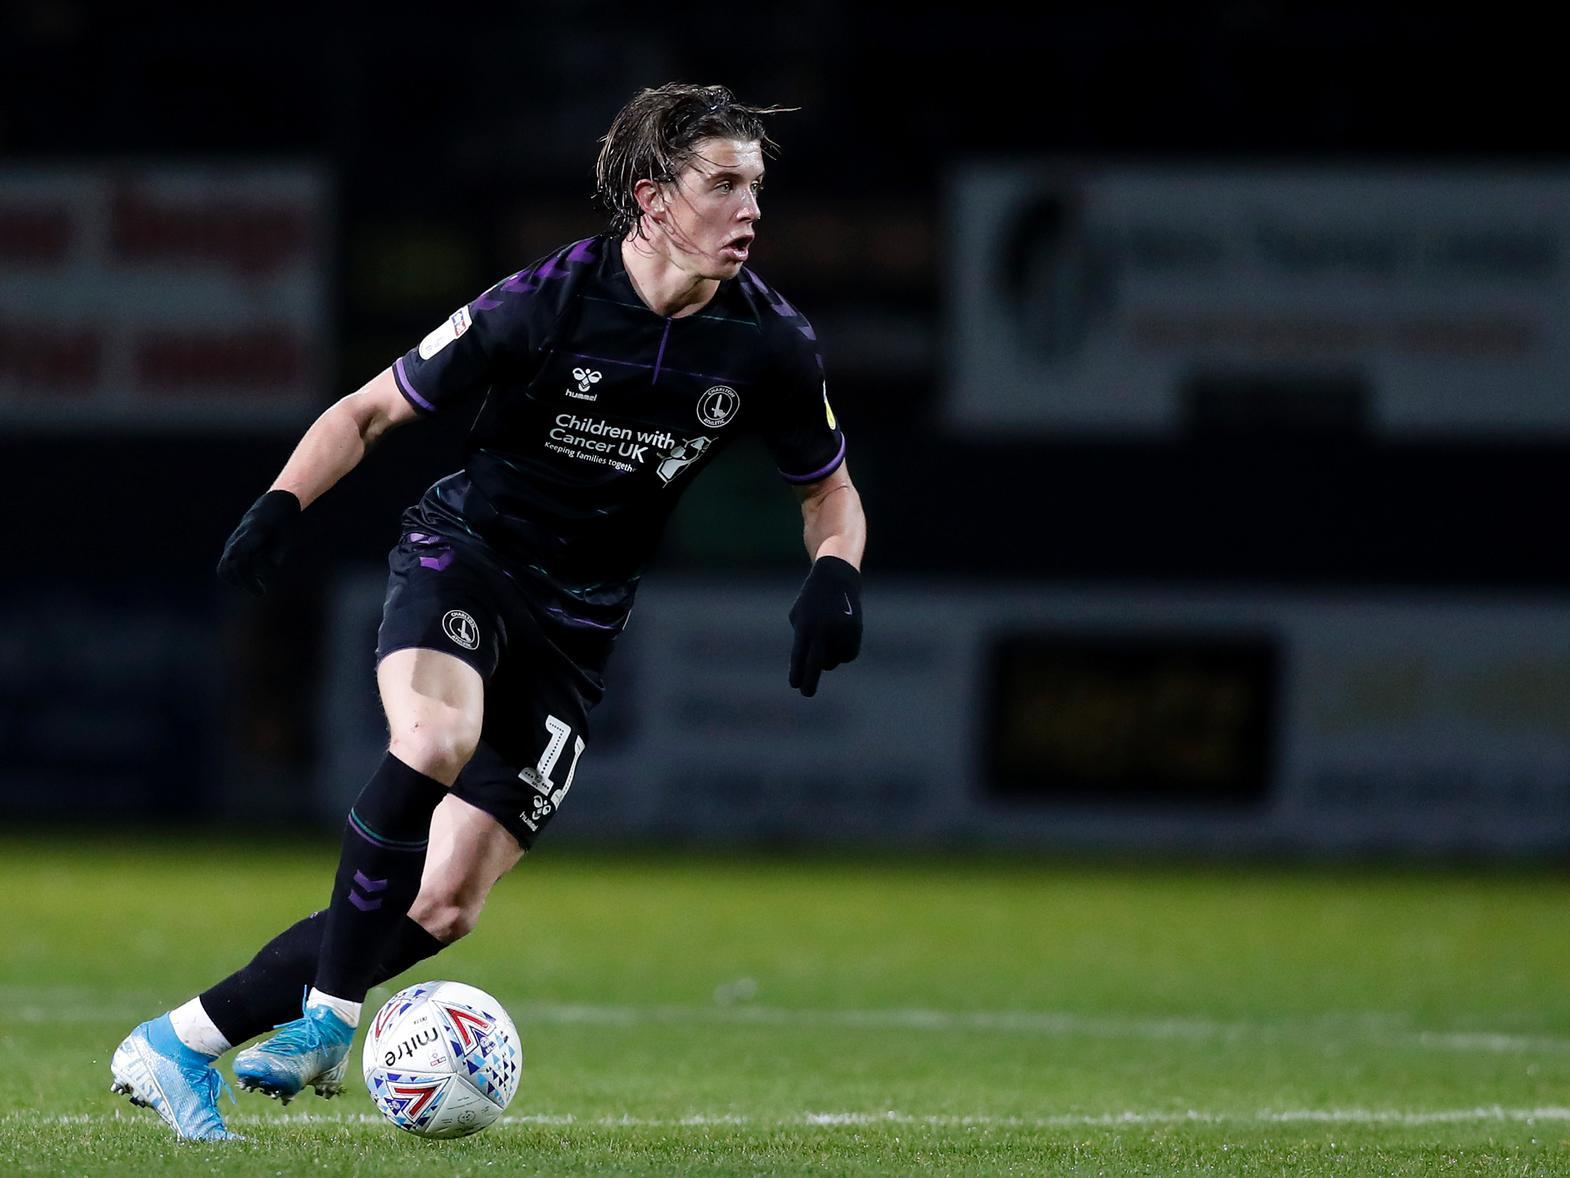 Swansea City have completed a loan move for Chelsea midfielder Connor Gallagher, who impressed during the first half of the season during a spell with Charlton Athletic. (Various)